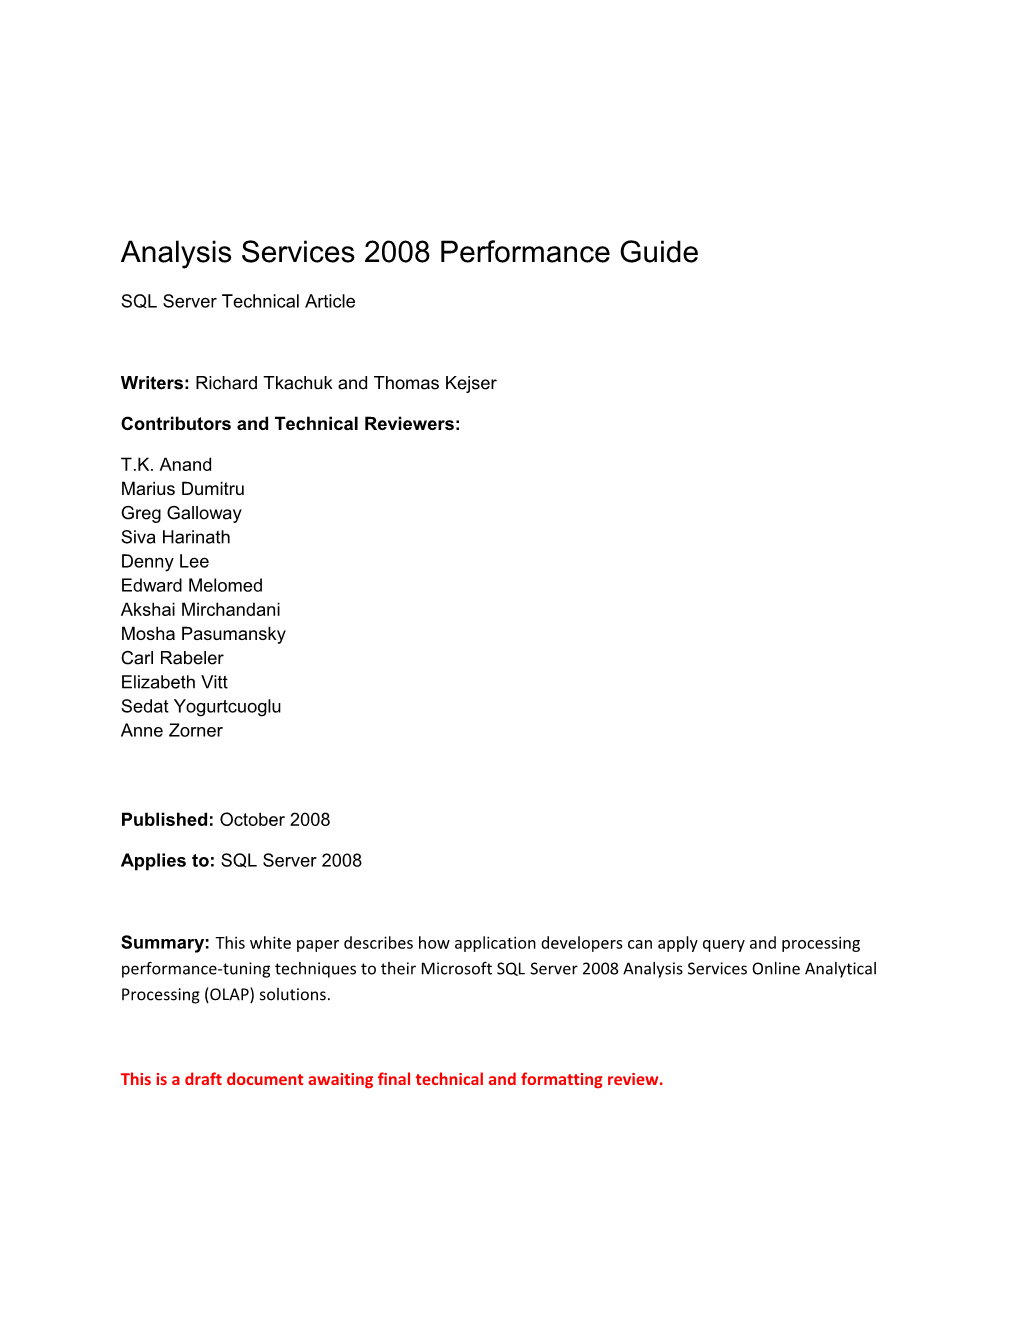 SQL Server Analysis Services 2008 Performance Guide